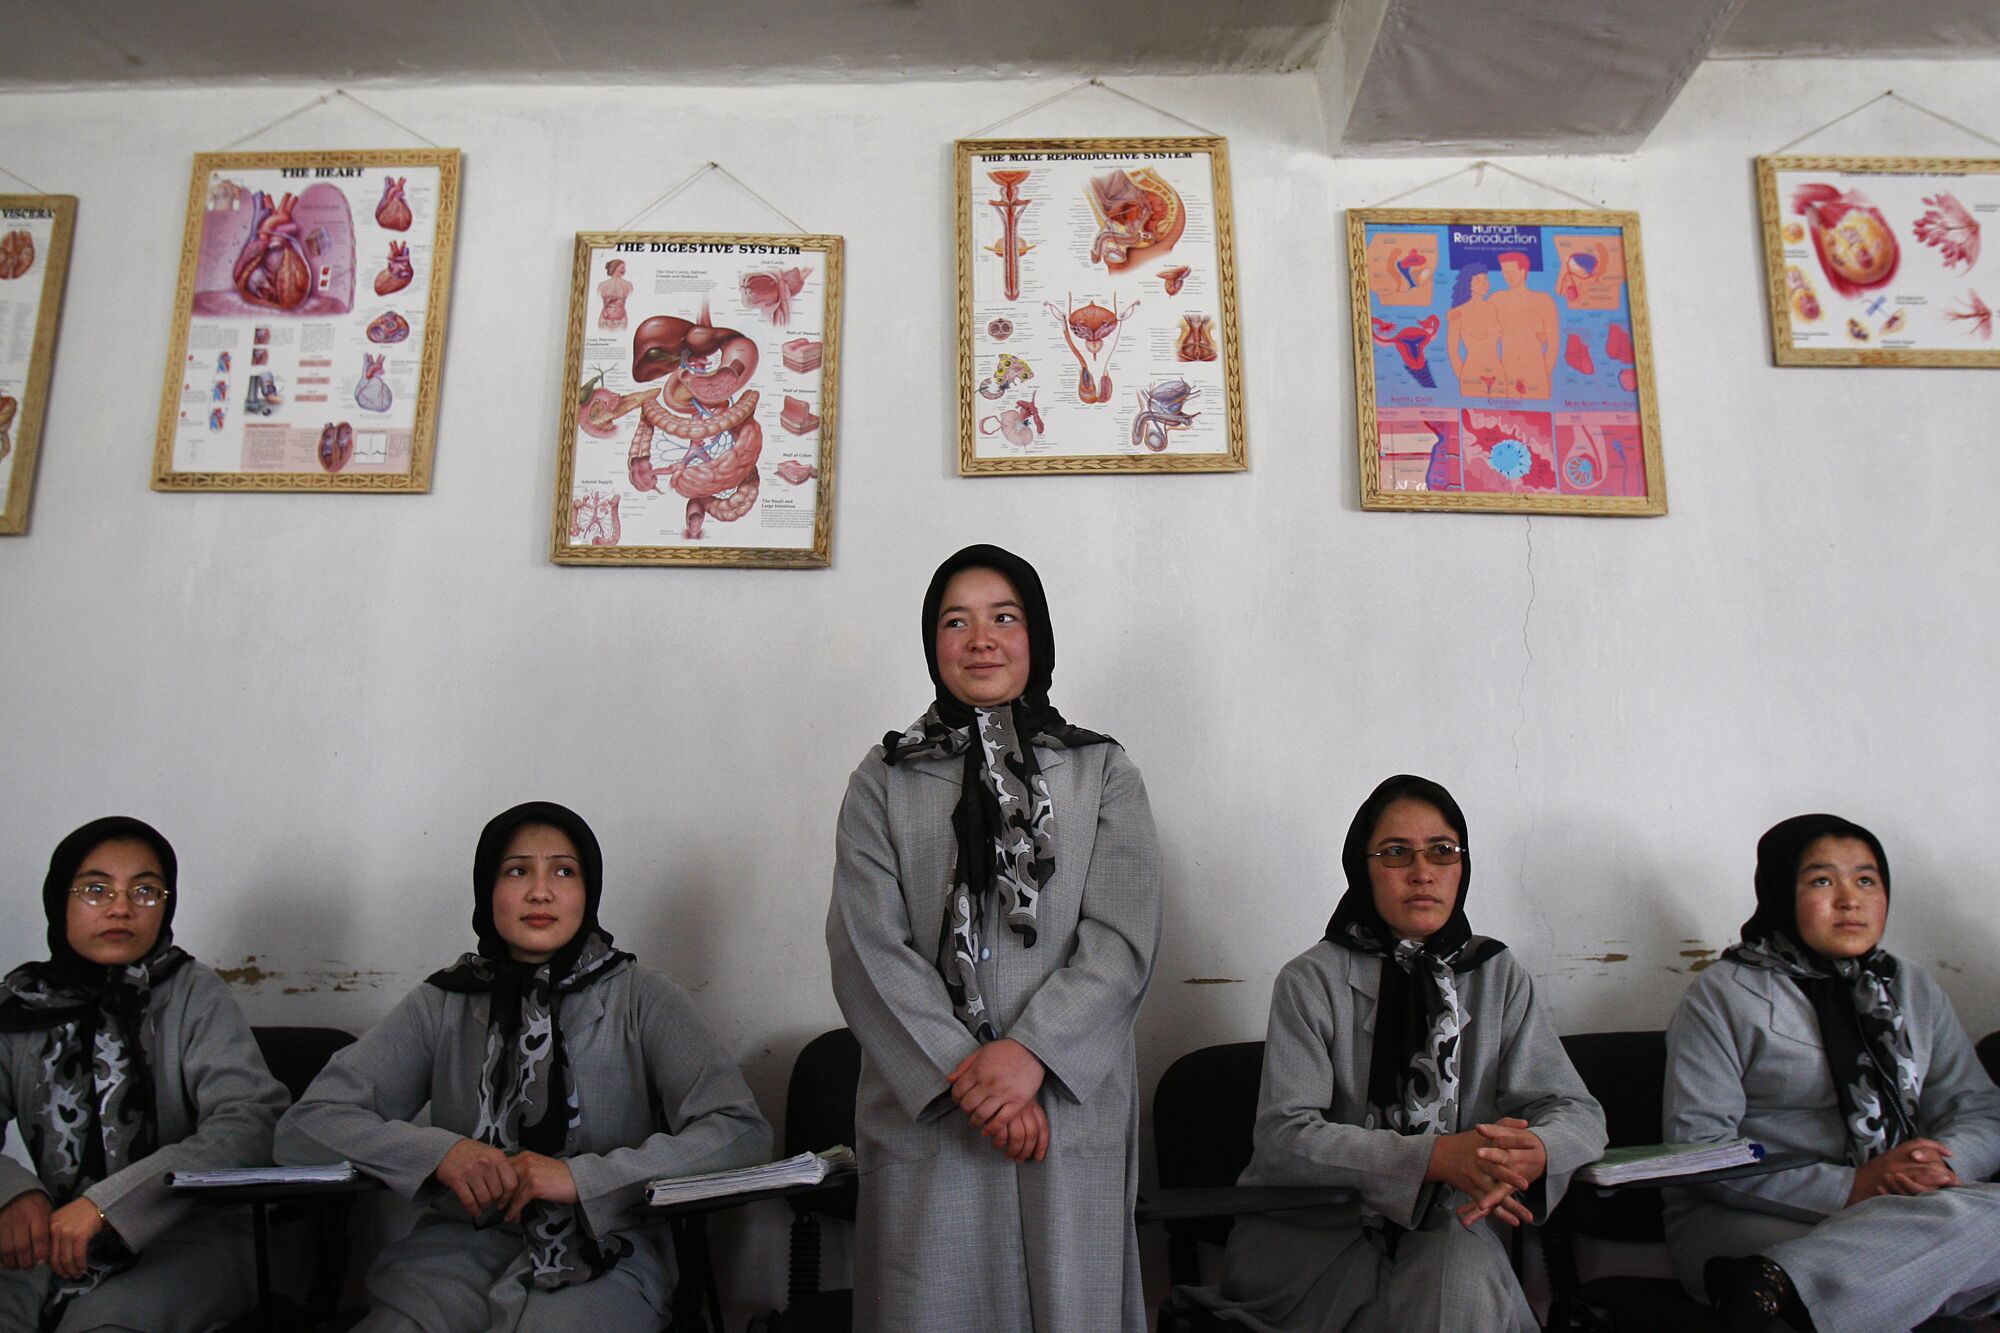 A young woman in a headscarf and gray uniform stands with four other women seated around her